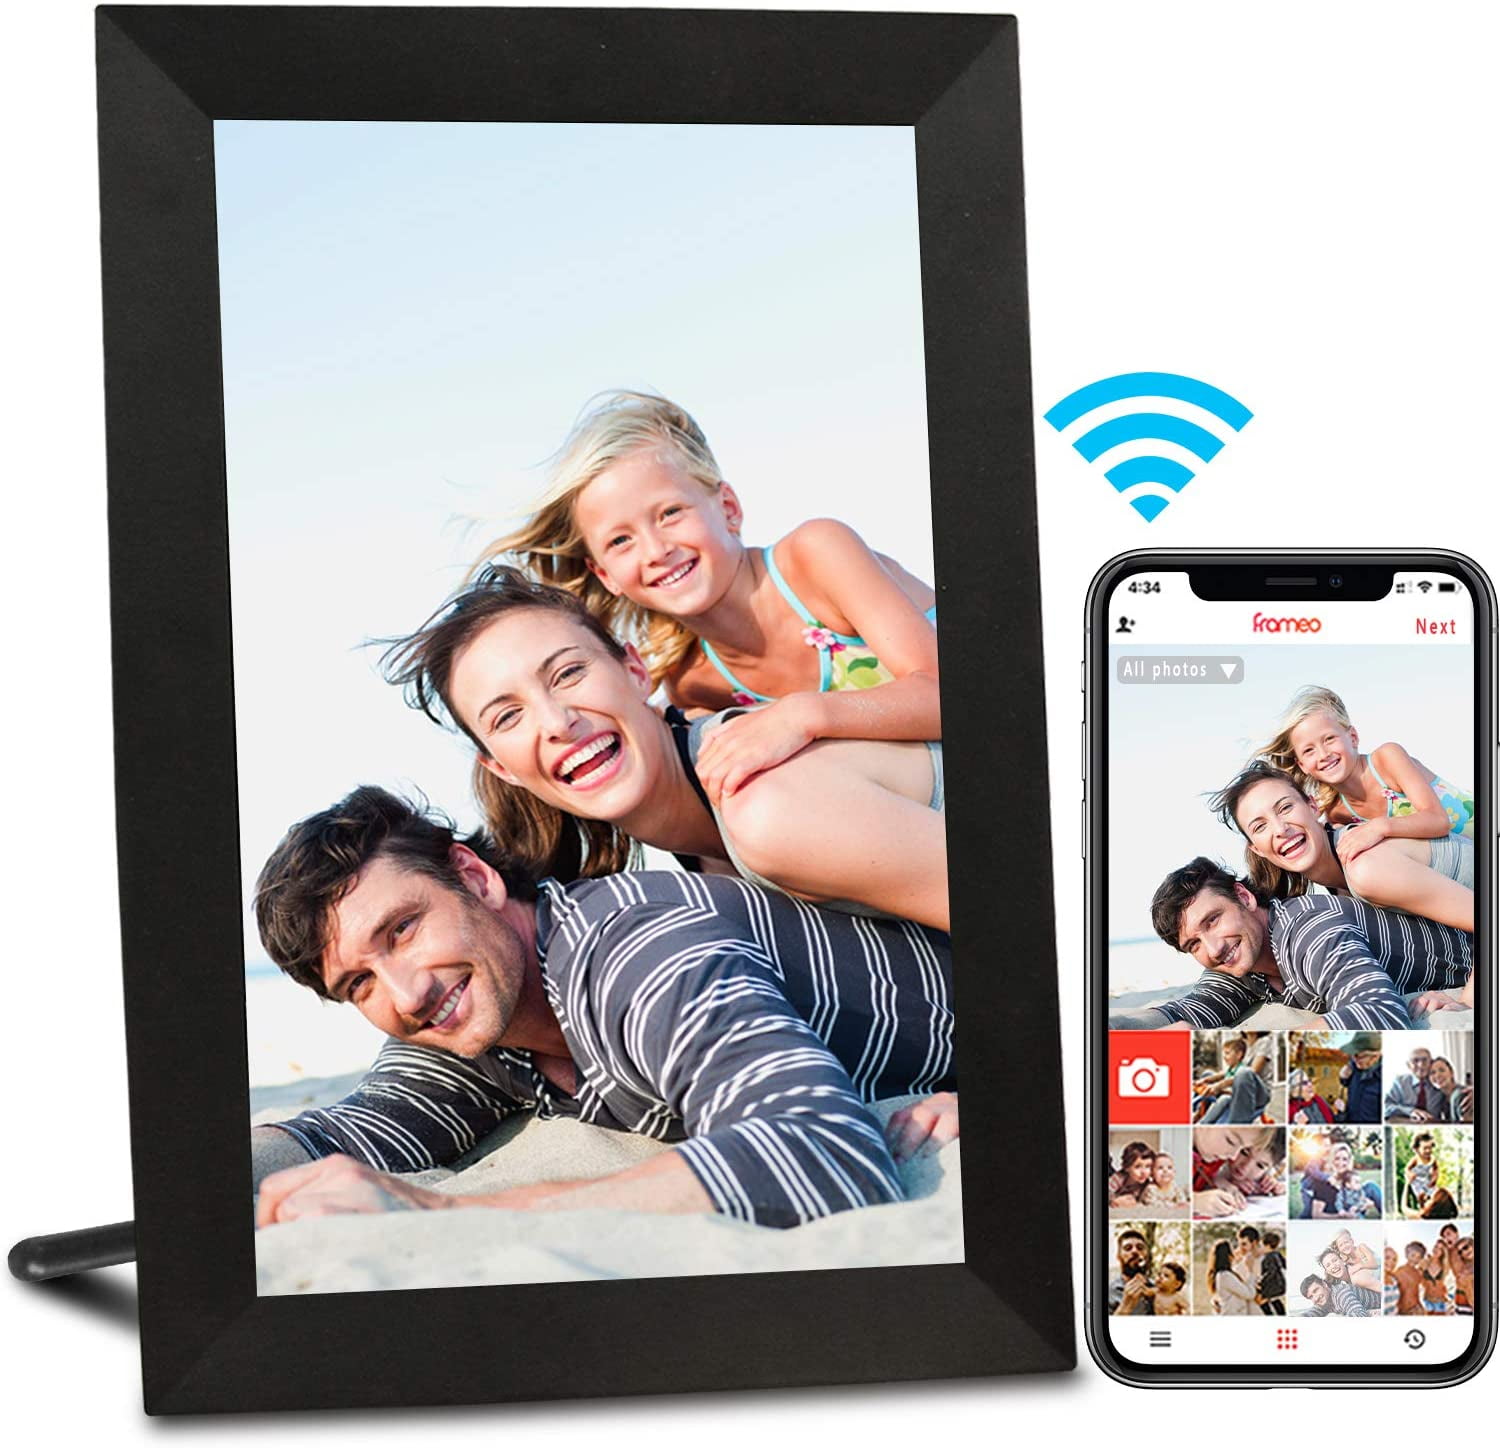 Instantly Share Photos/Videos via App Email Easy-to-Use Touch Screen BSIMB Smart WiFi Digital Picture Frame 16GB with Wood Effect Auto Rotate in Landscape or Portrait 10.1 Inch HD IPS Display 